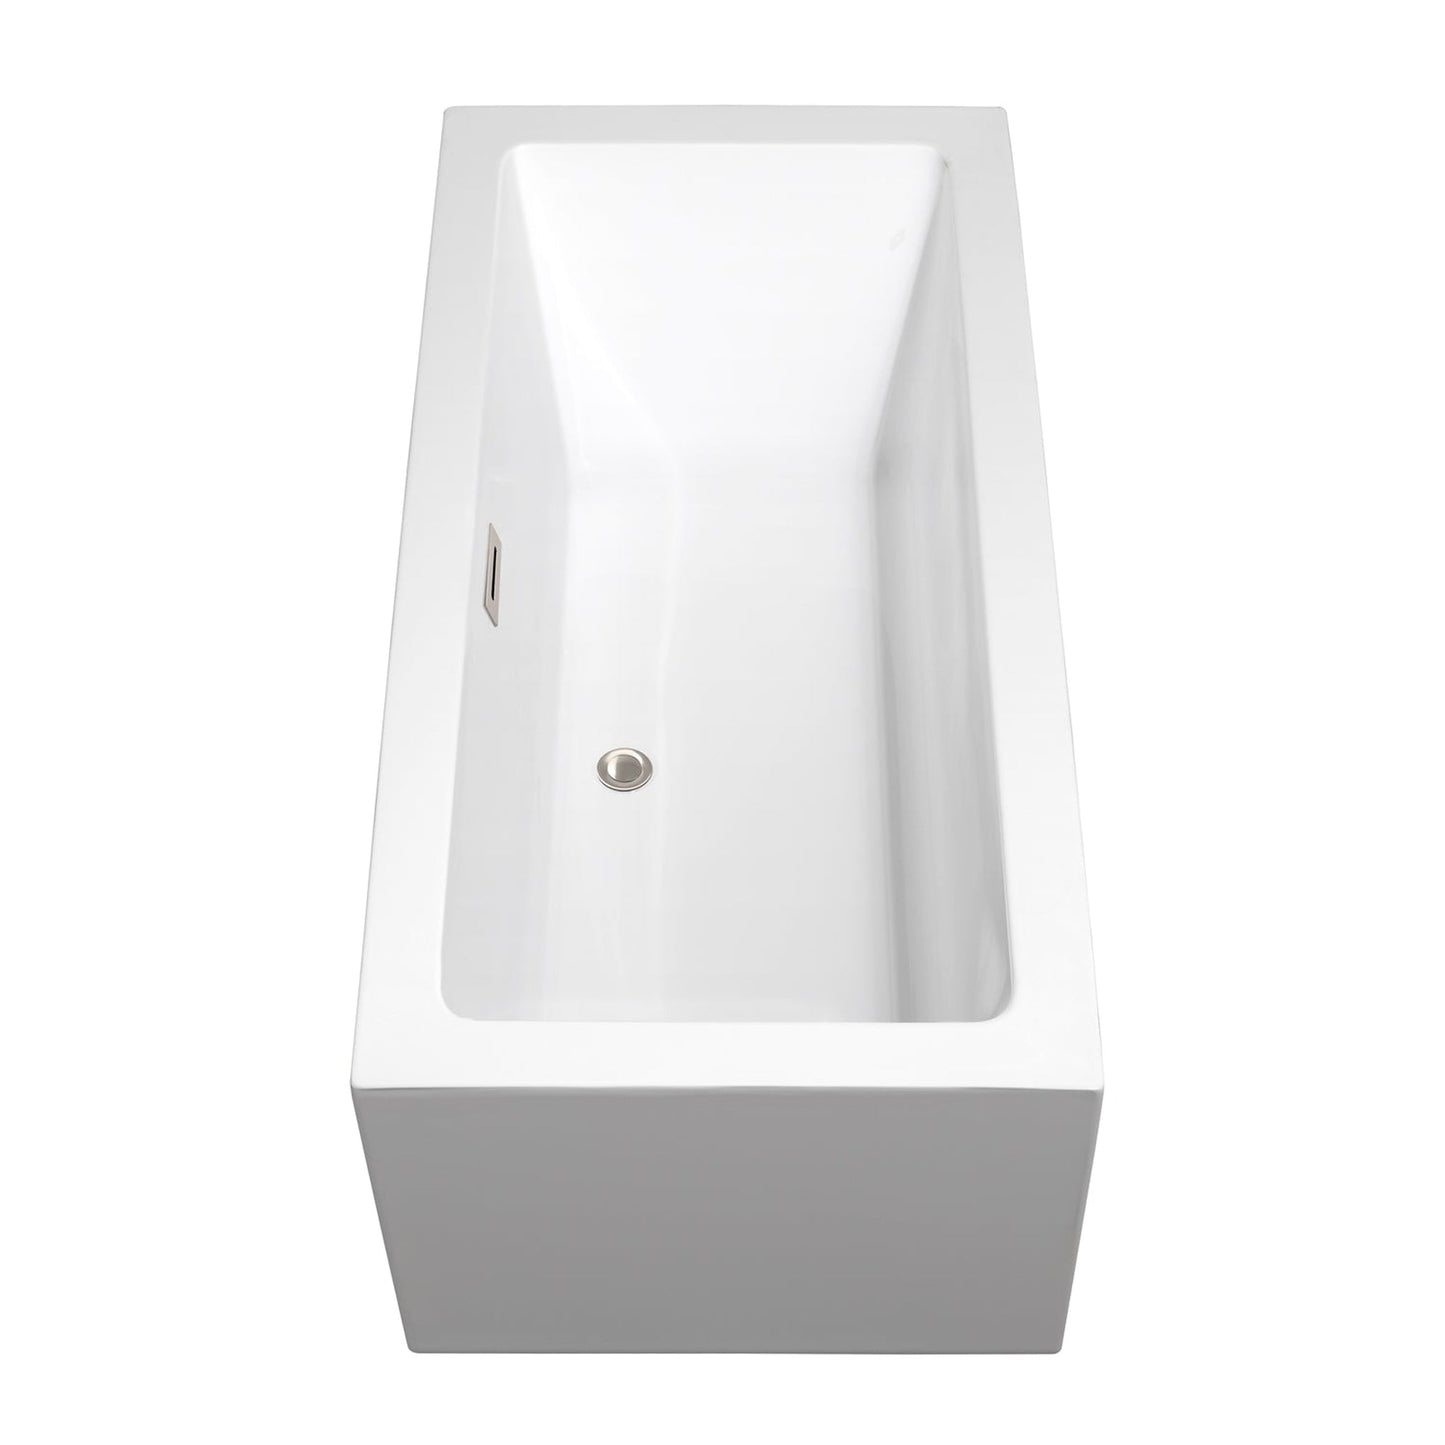 Wyndham Collection Melody 60" Freestanding Bathtub in White With Floor Mounted Faucet, Drain and Overflow Trim in Brushed Nickel